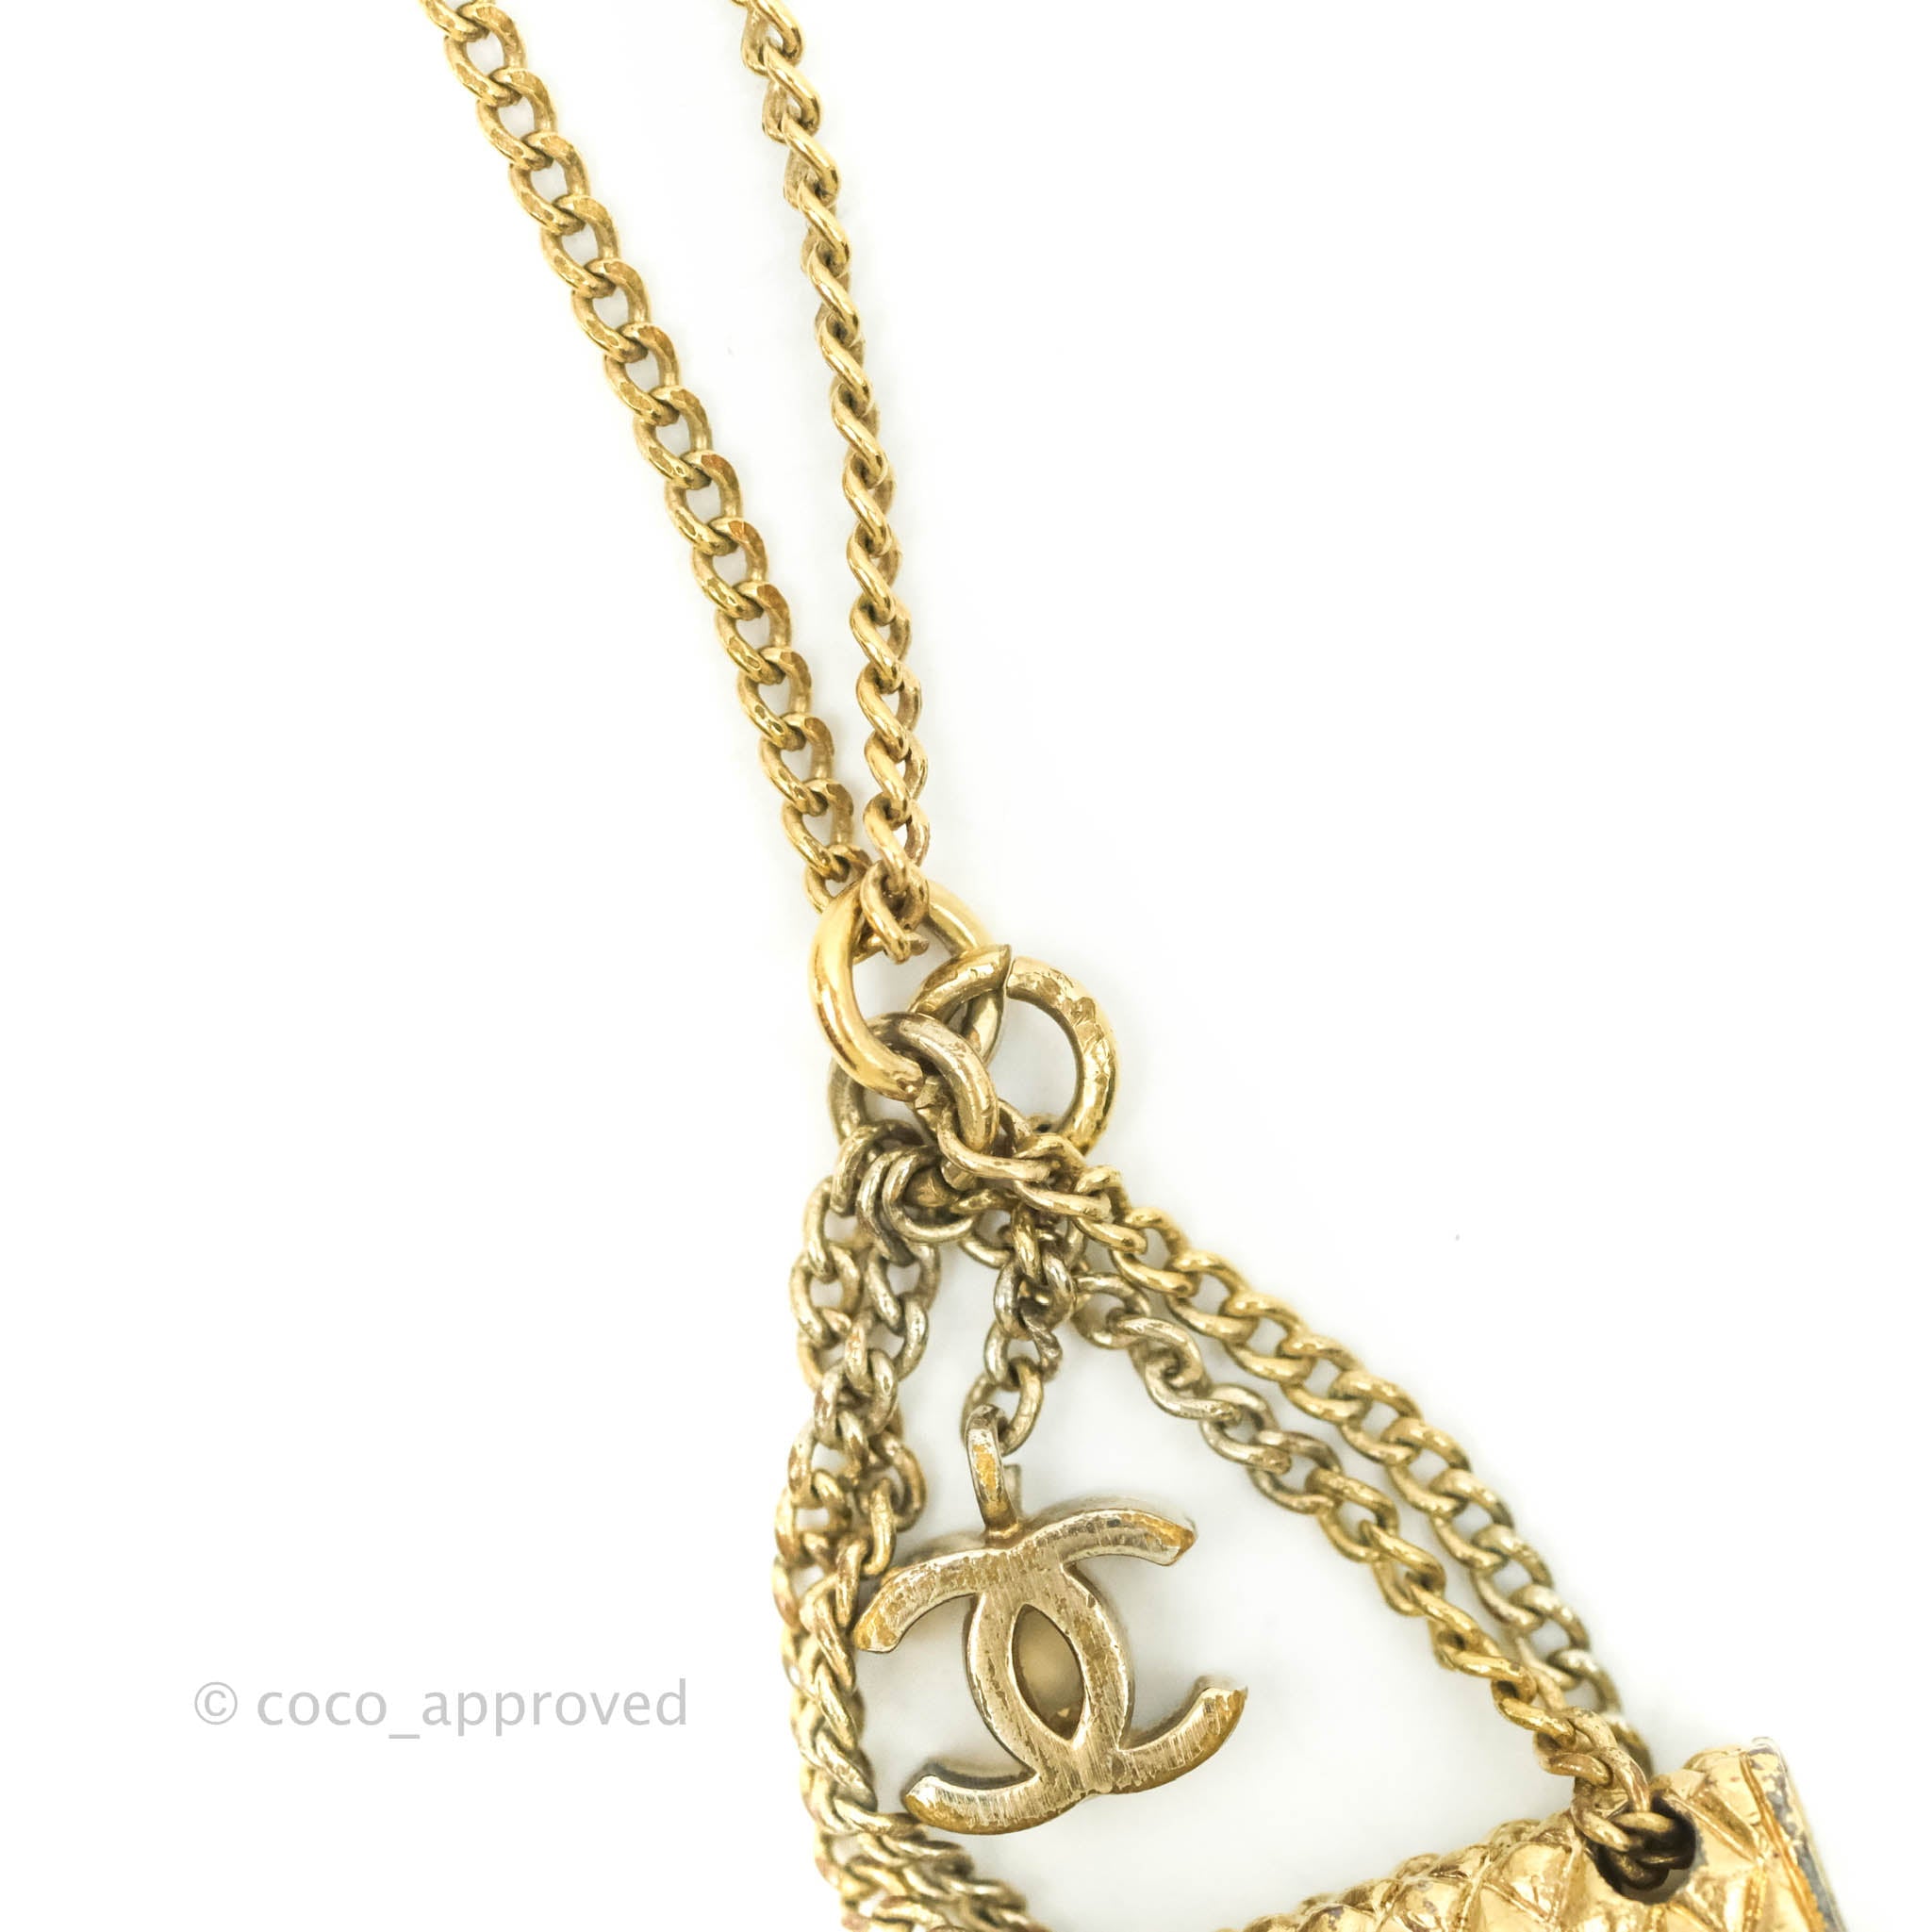 Chanel Flap Bag CC Pendant Necklace Gold Tone 05A – Coco Approved Studio